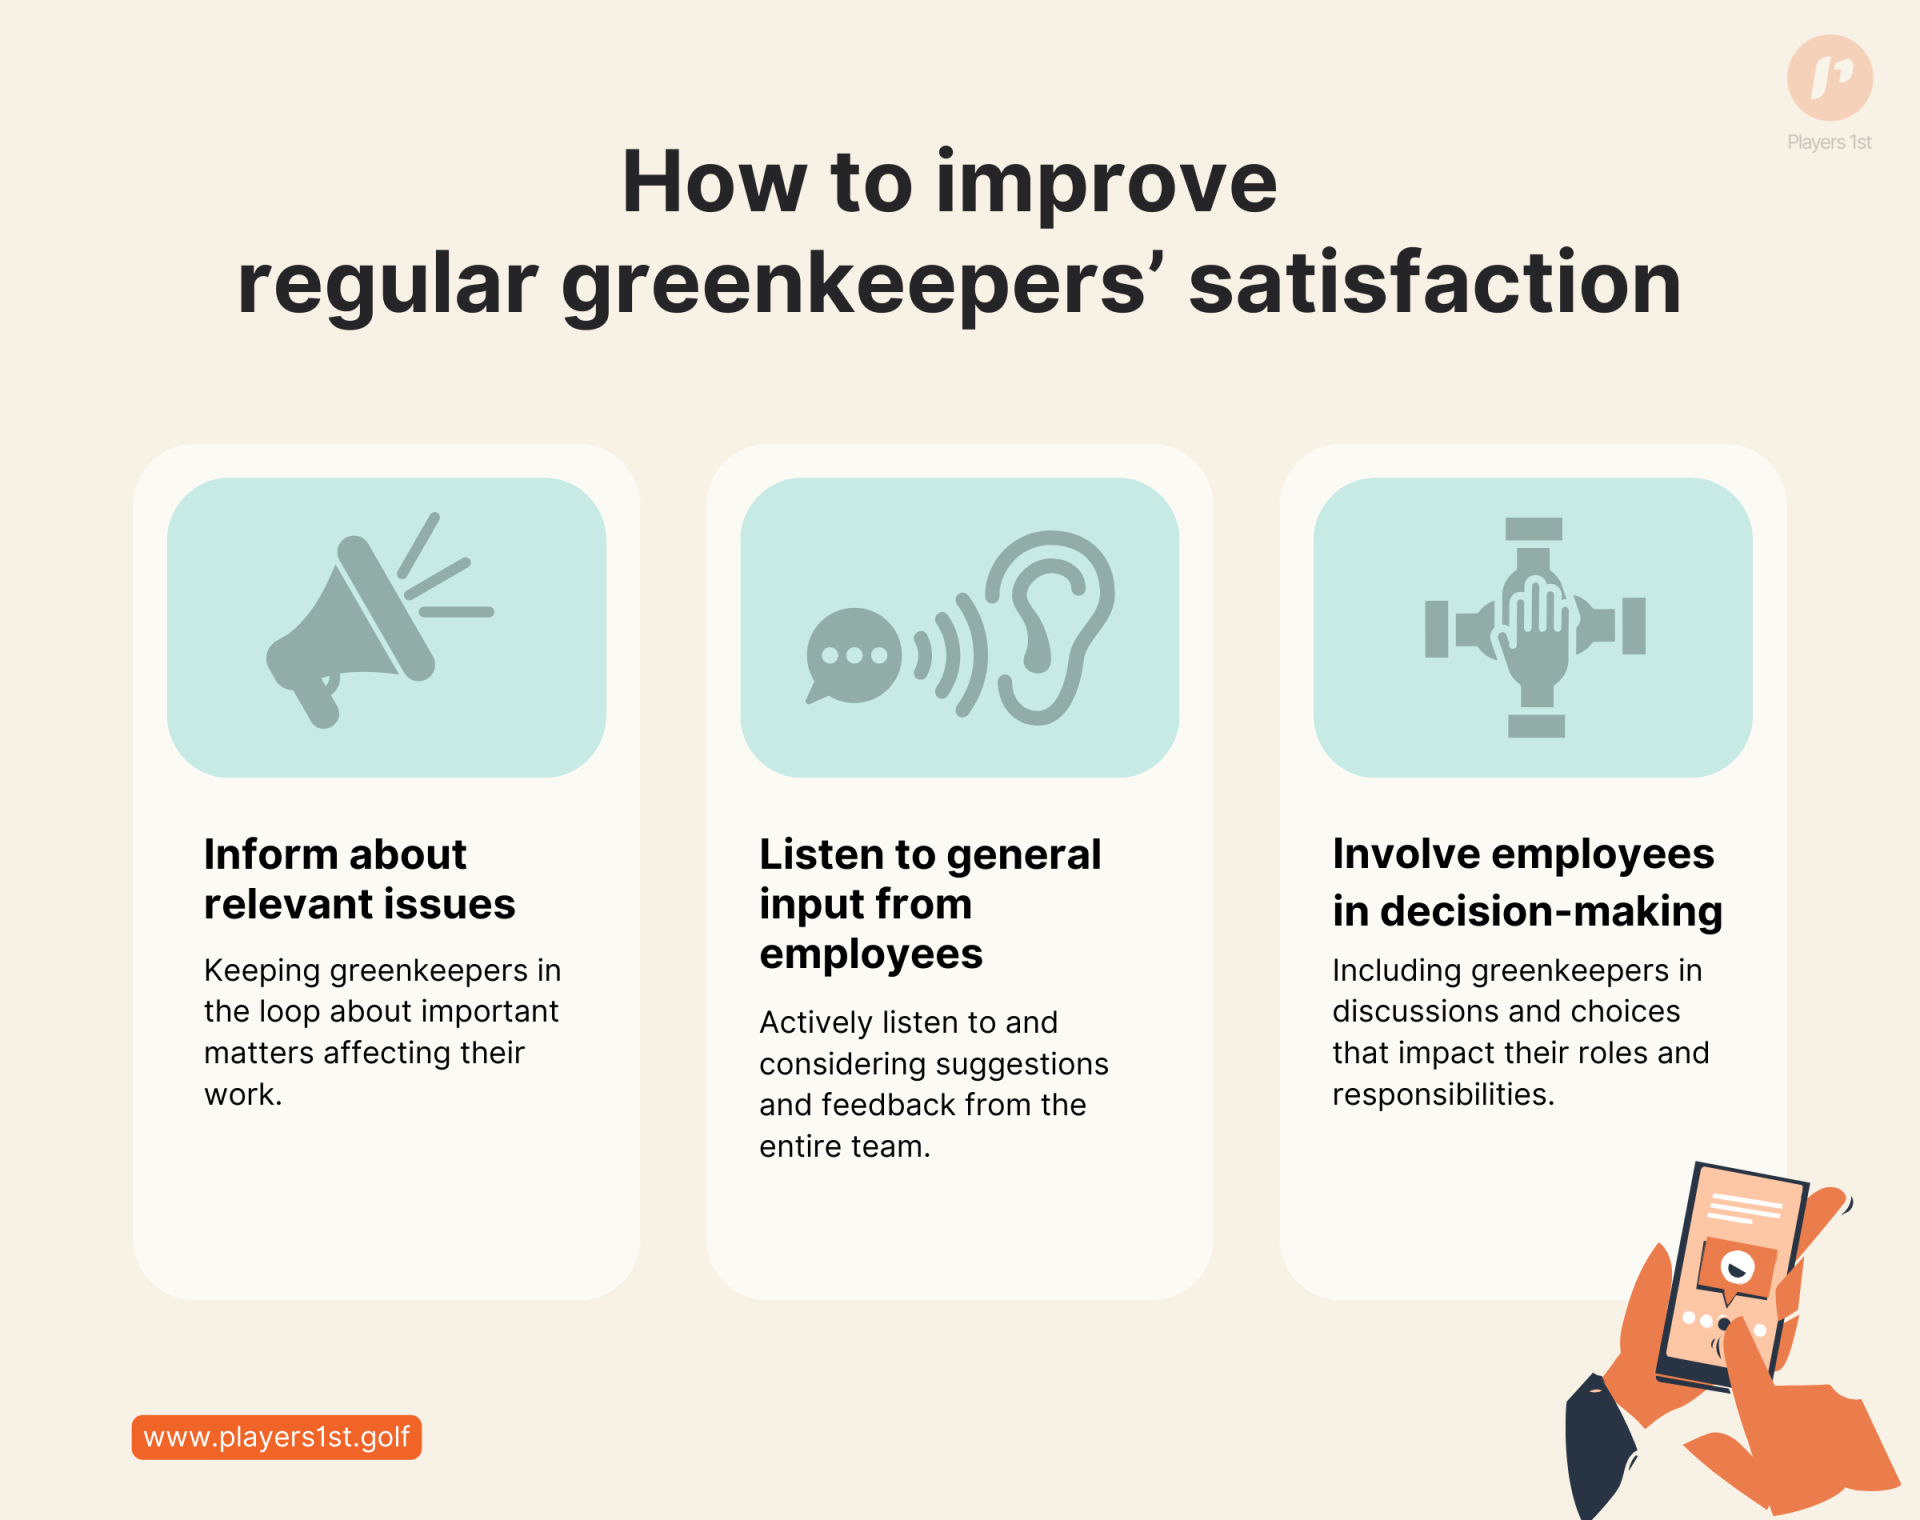 How boards can improve regular greenkeepers' satisfaction. Source: Players 1st